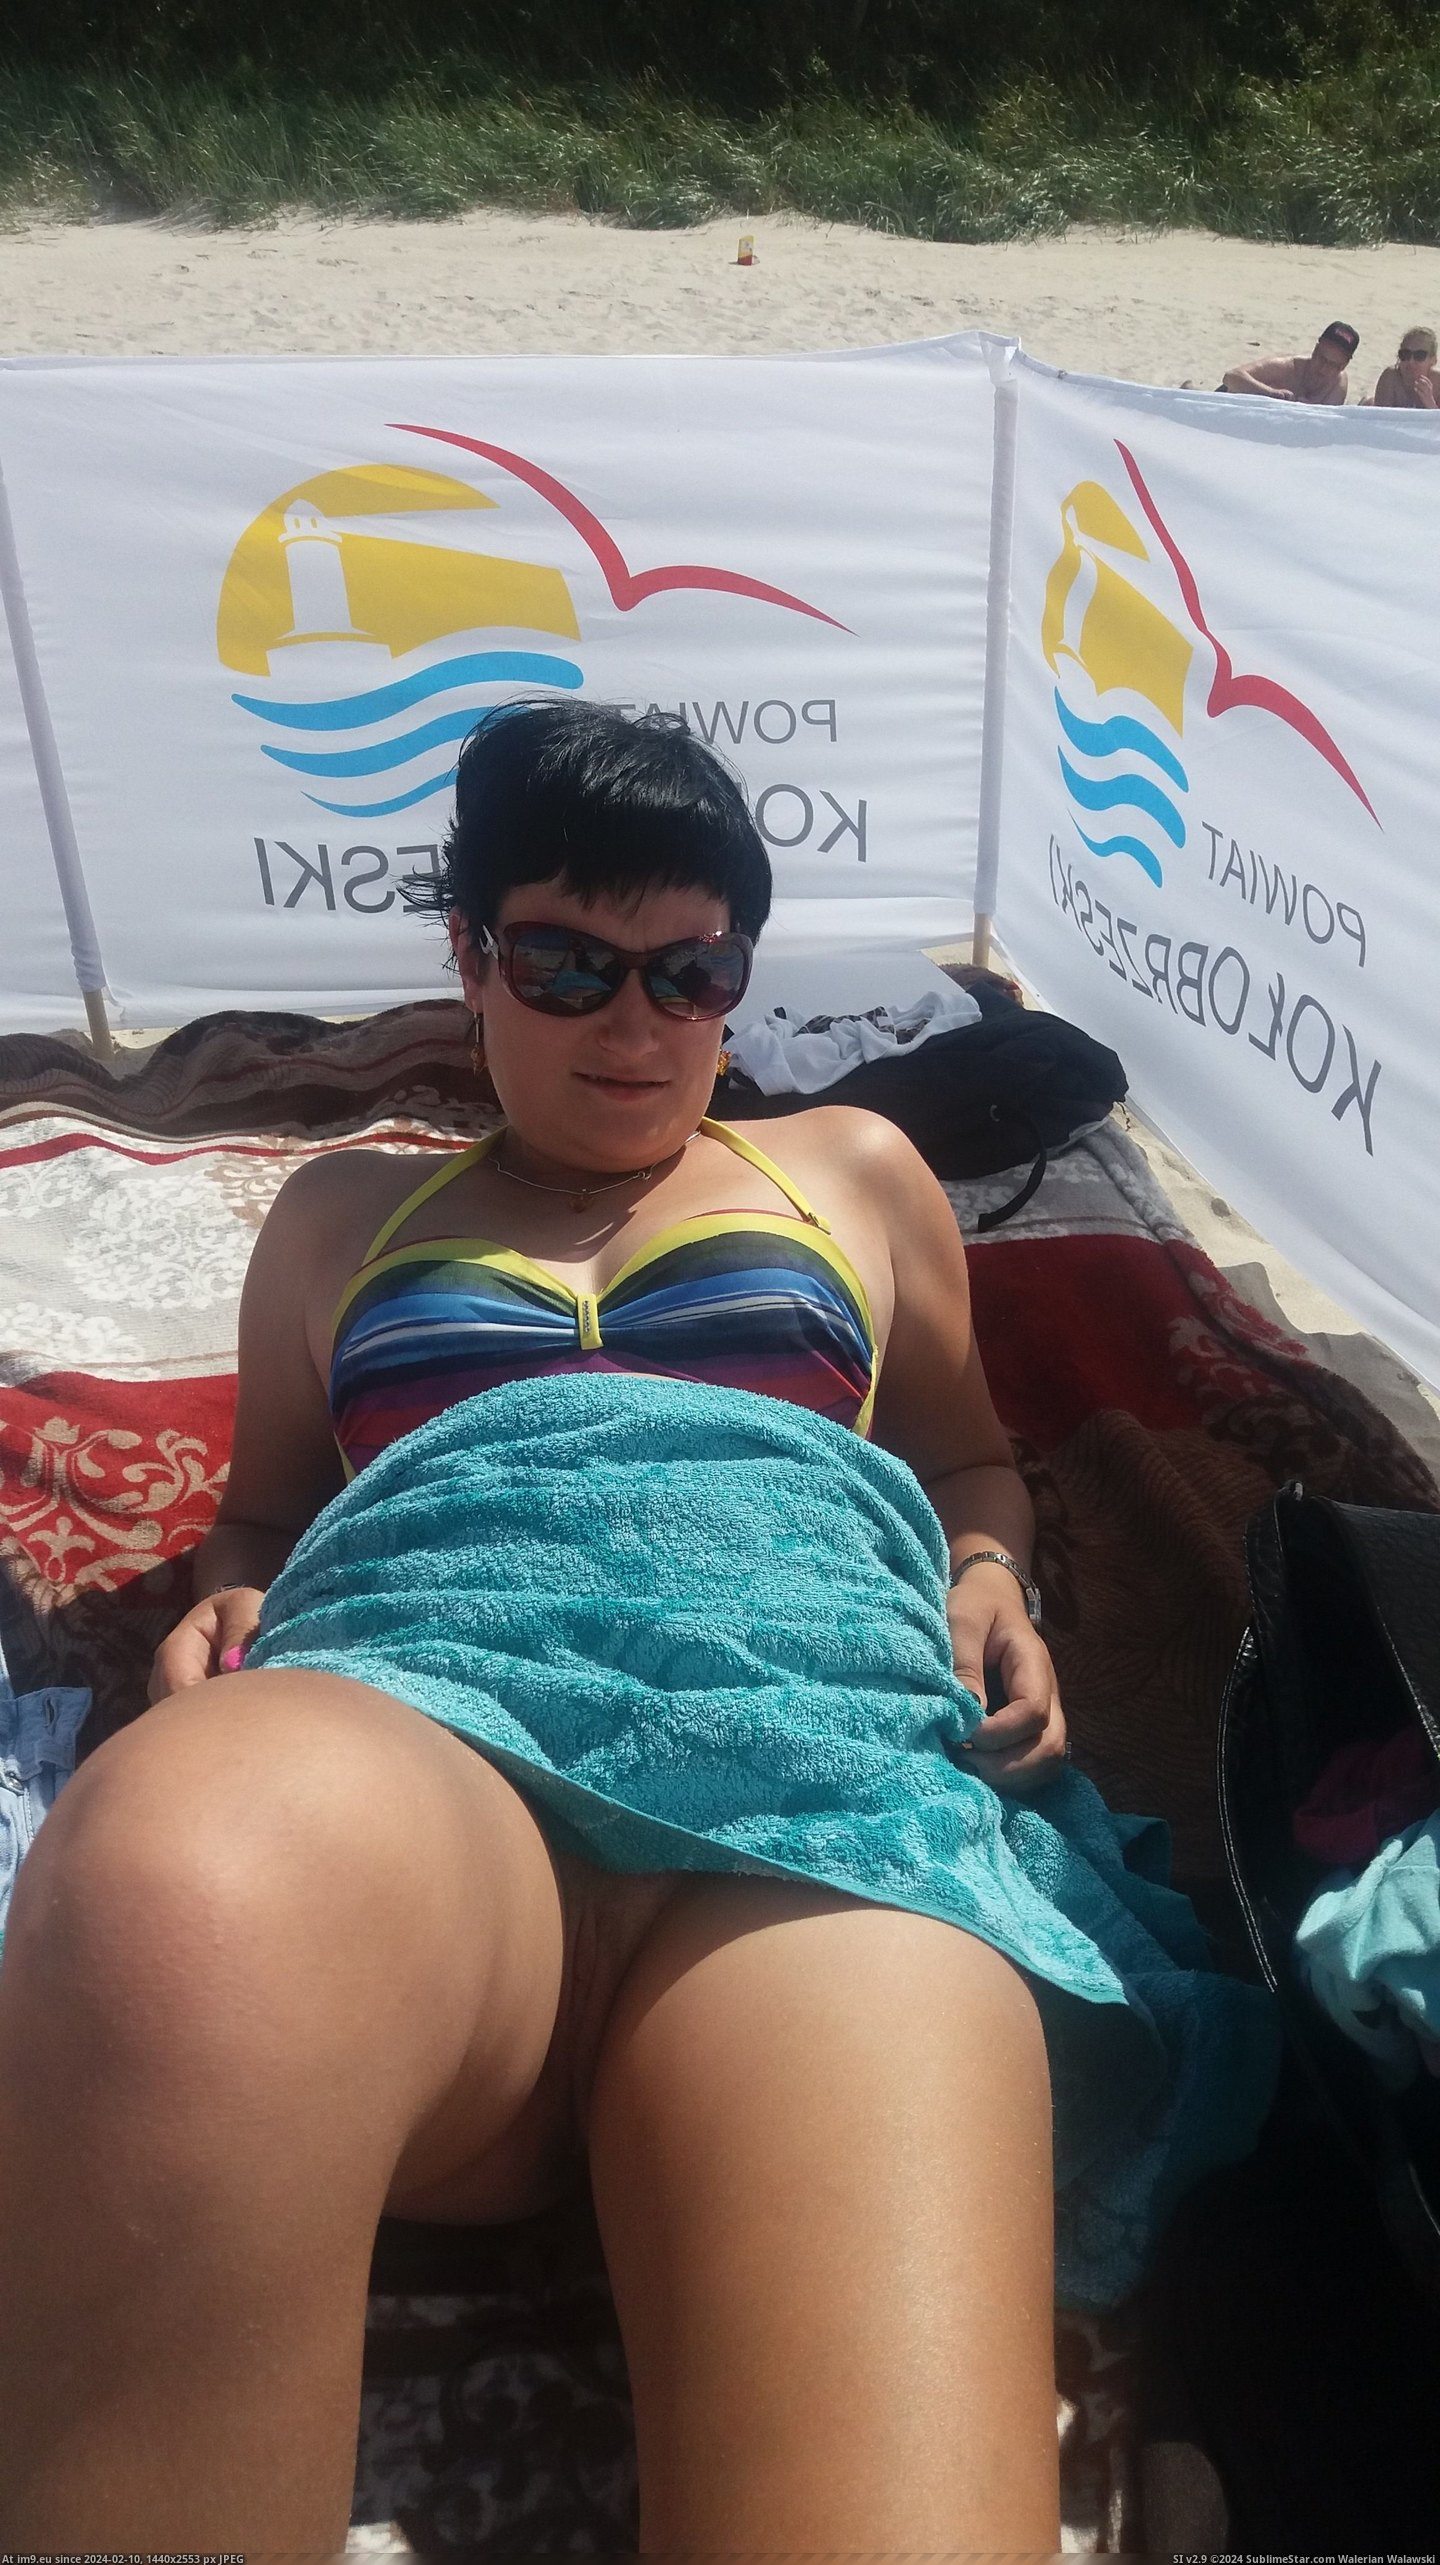  #Pussy  20160712_144551 Pic. (Изображение из альбом Joanna shows in public pussy the beach))